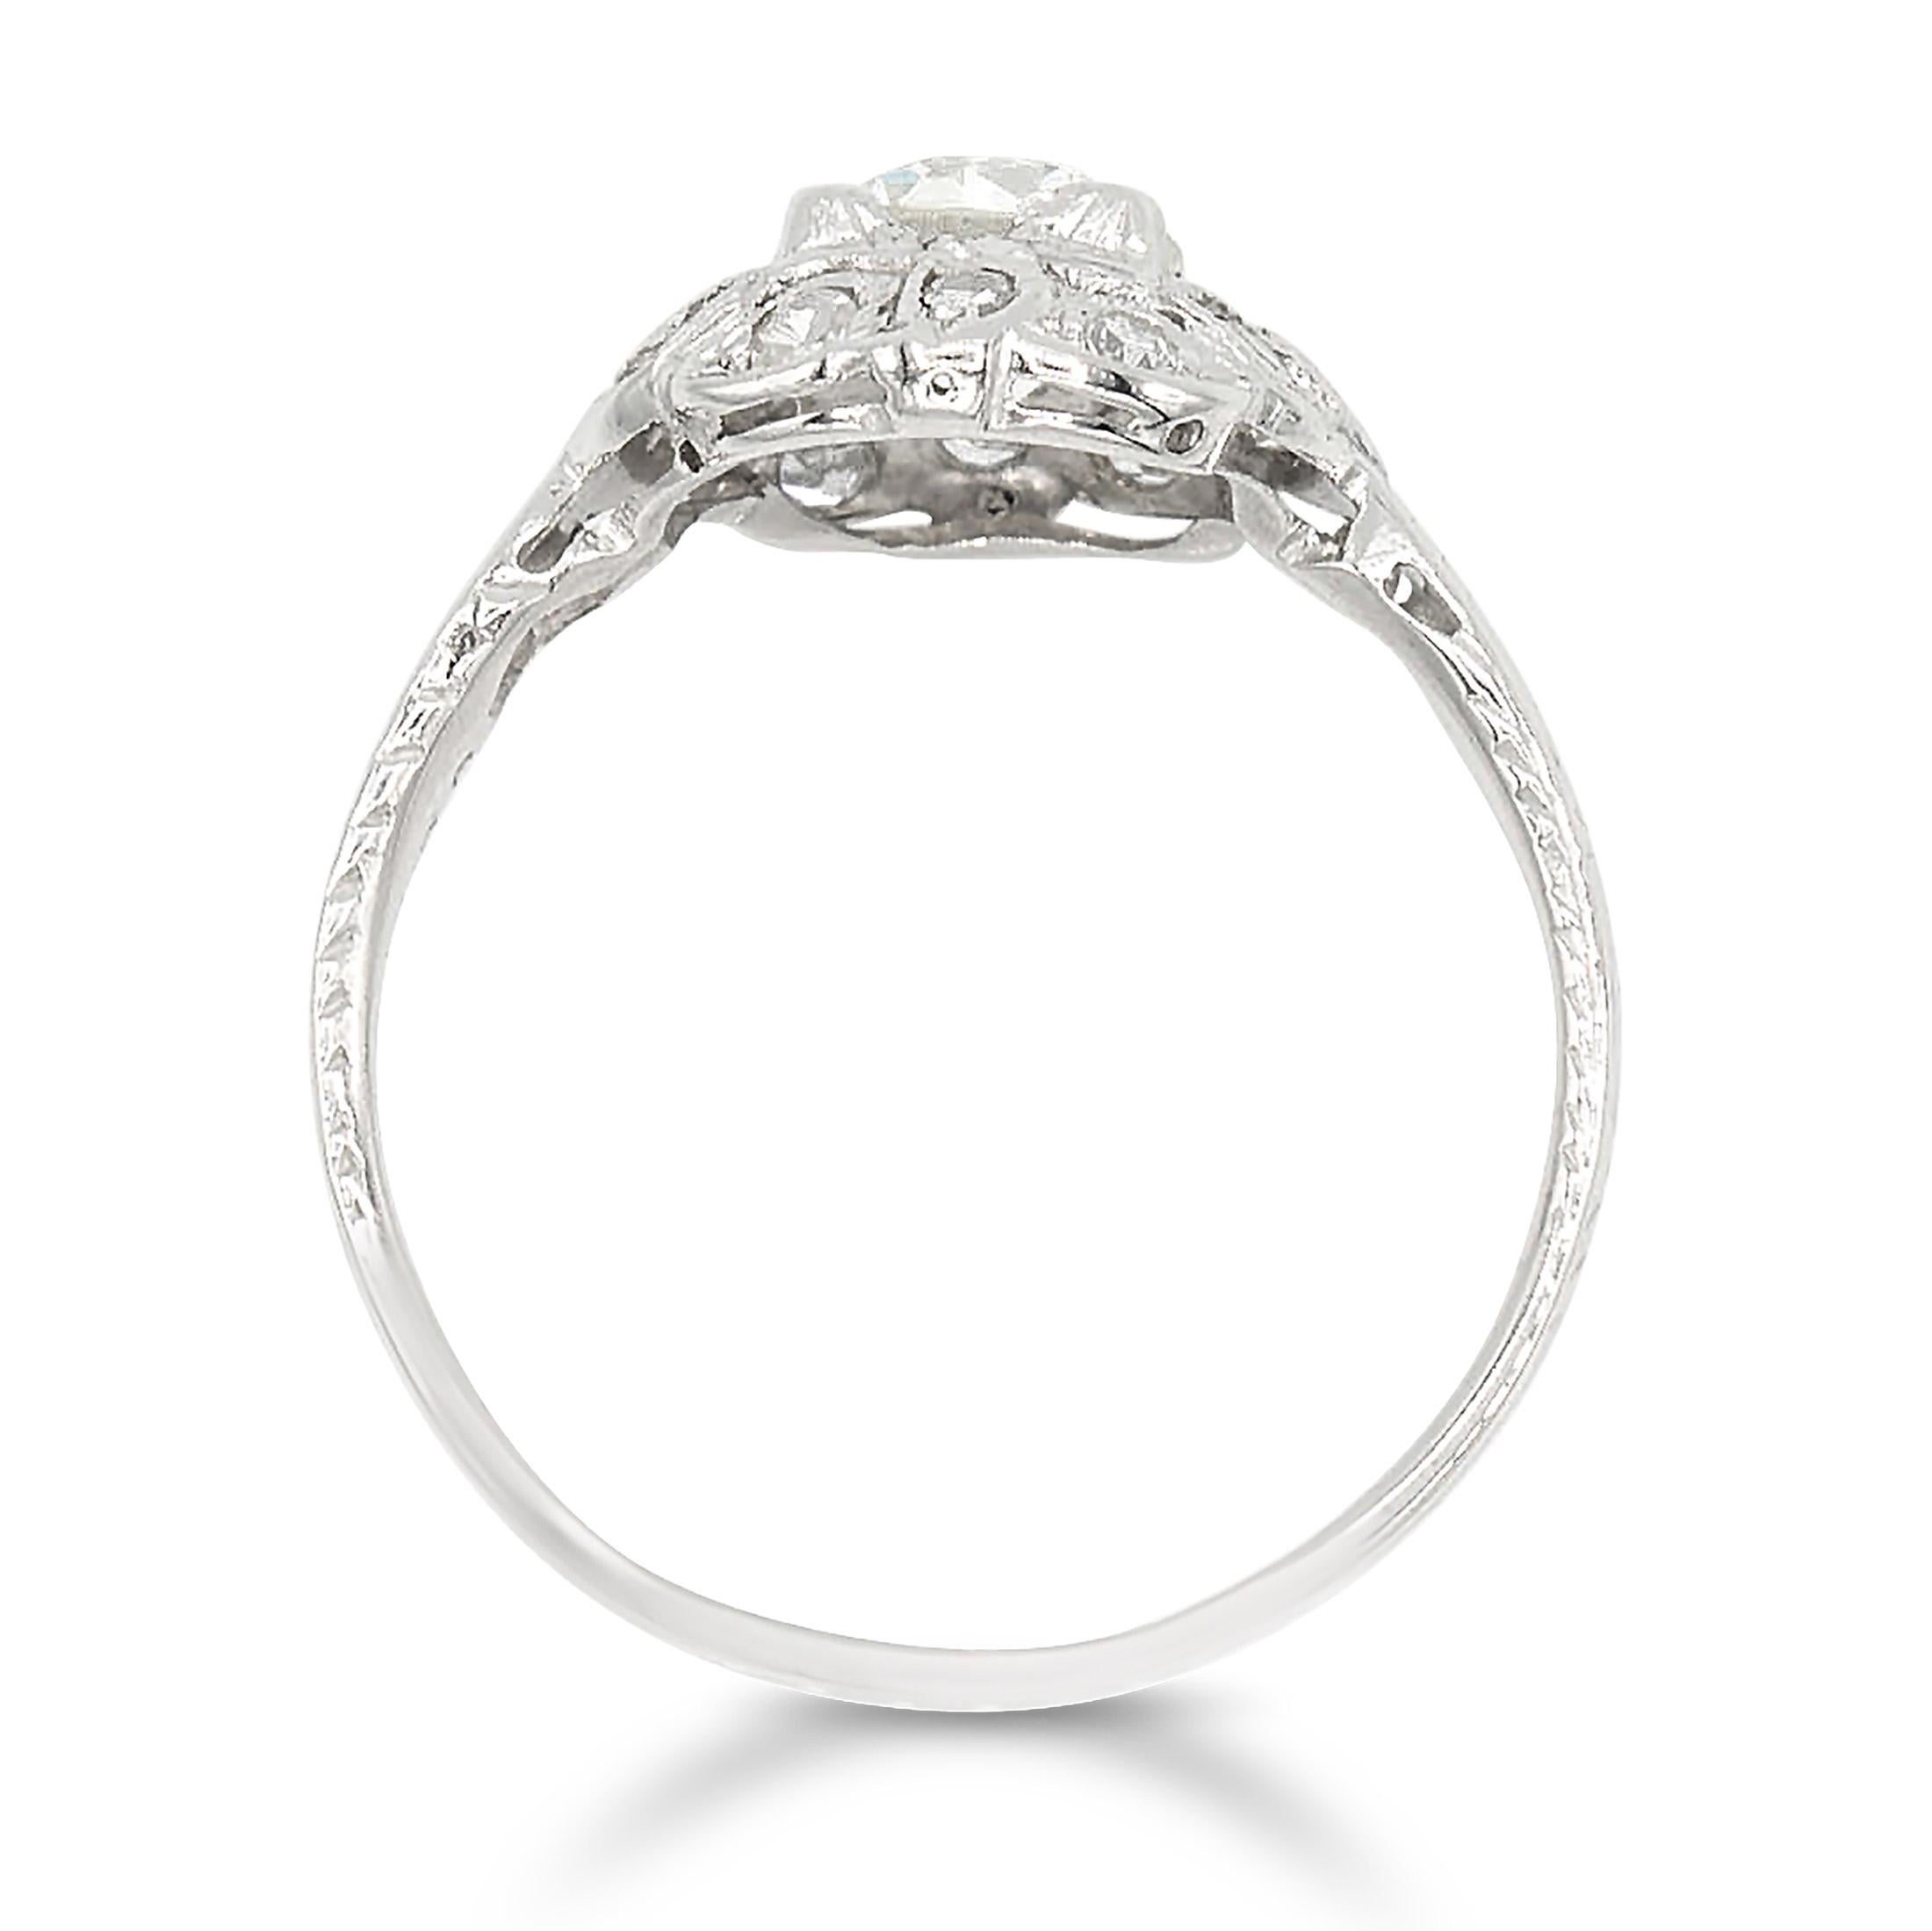 Edwardian 1.13 Ct. Old European Engagement Ring GIA K VS1 in Platinum In Good Condition For Sale In New York, NY